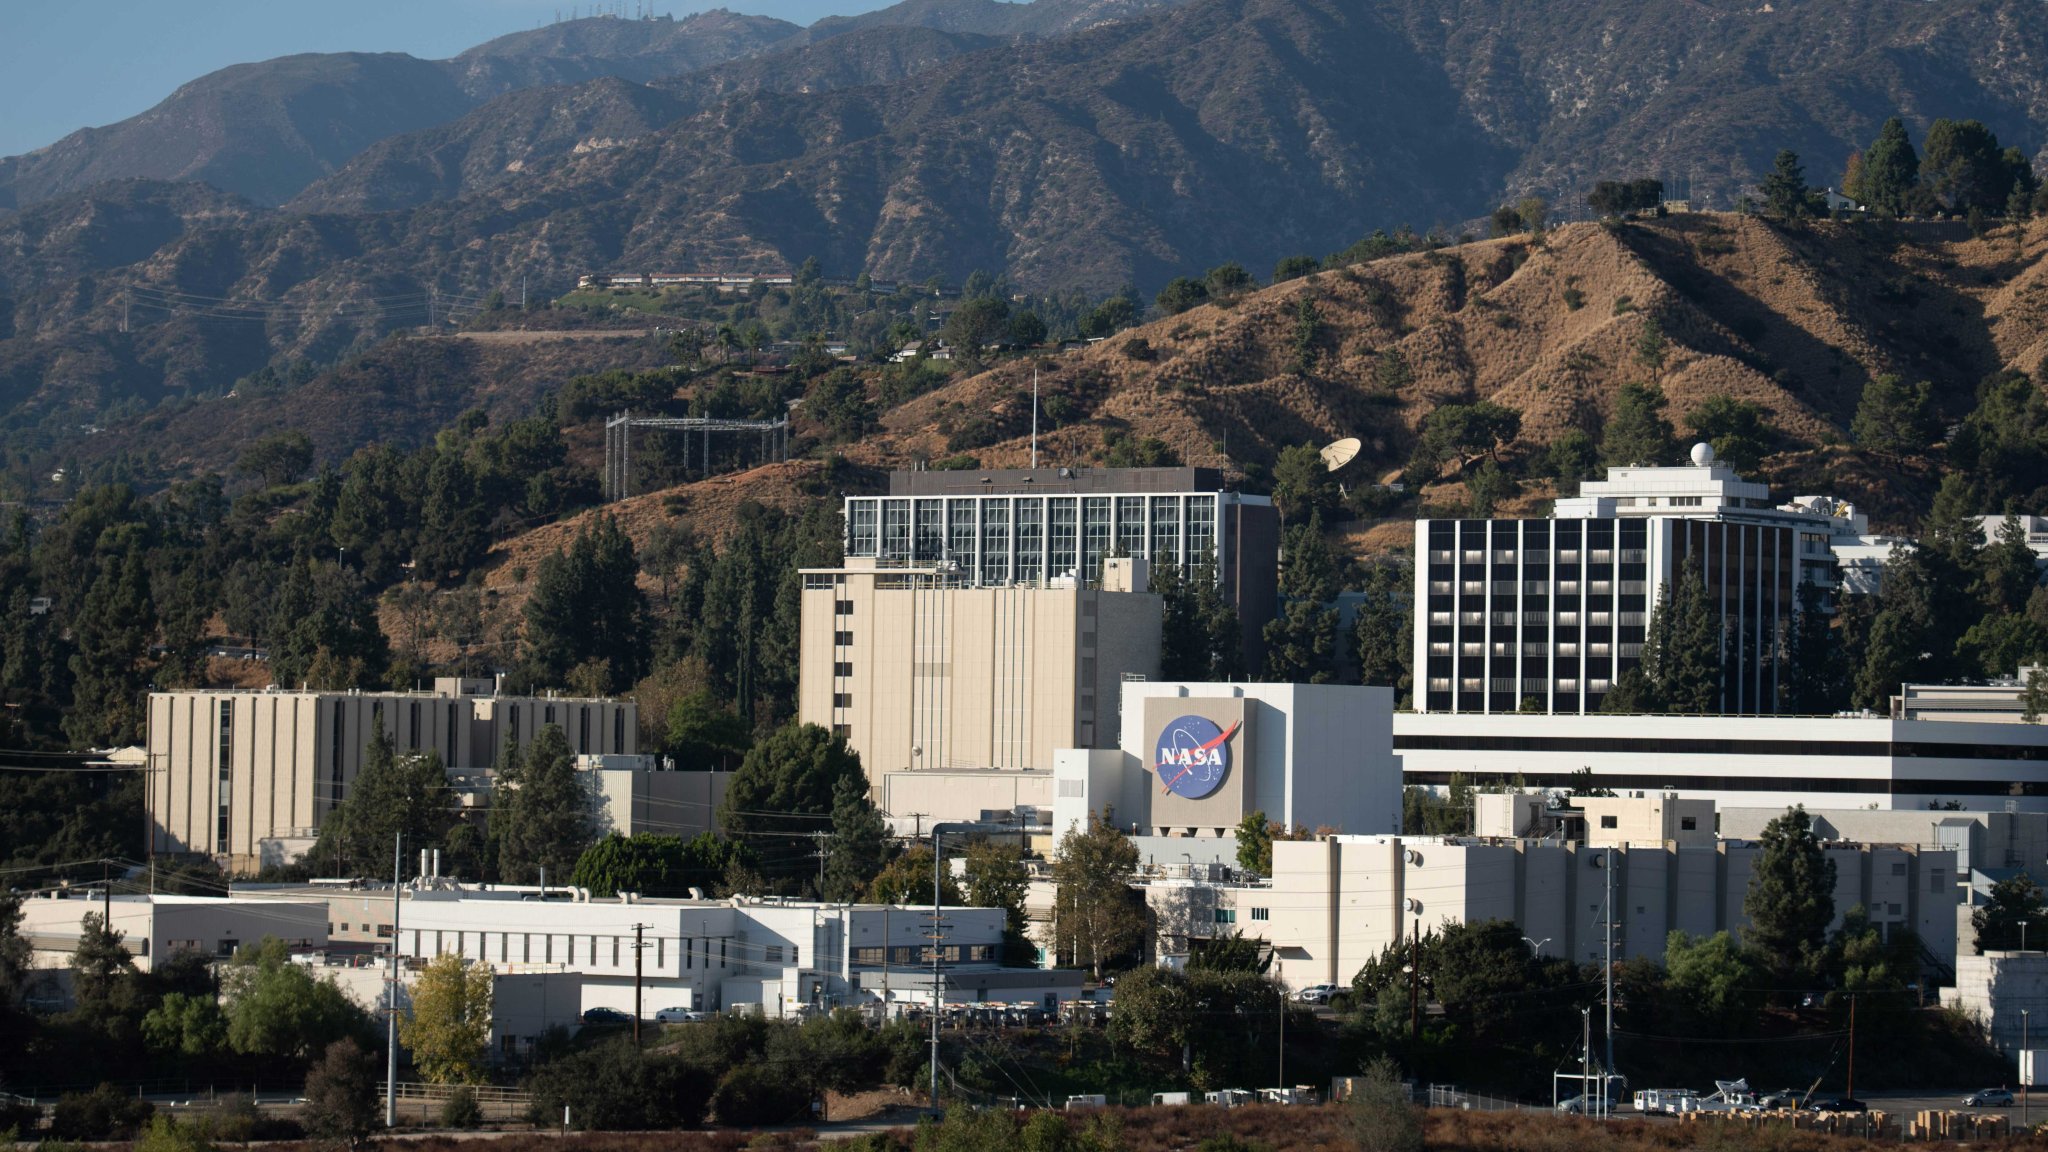 Image of the JPL campus, with the San Gabriel mountains in the background